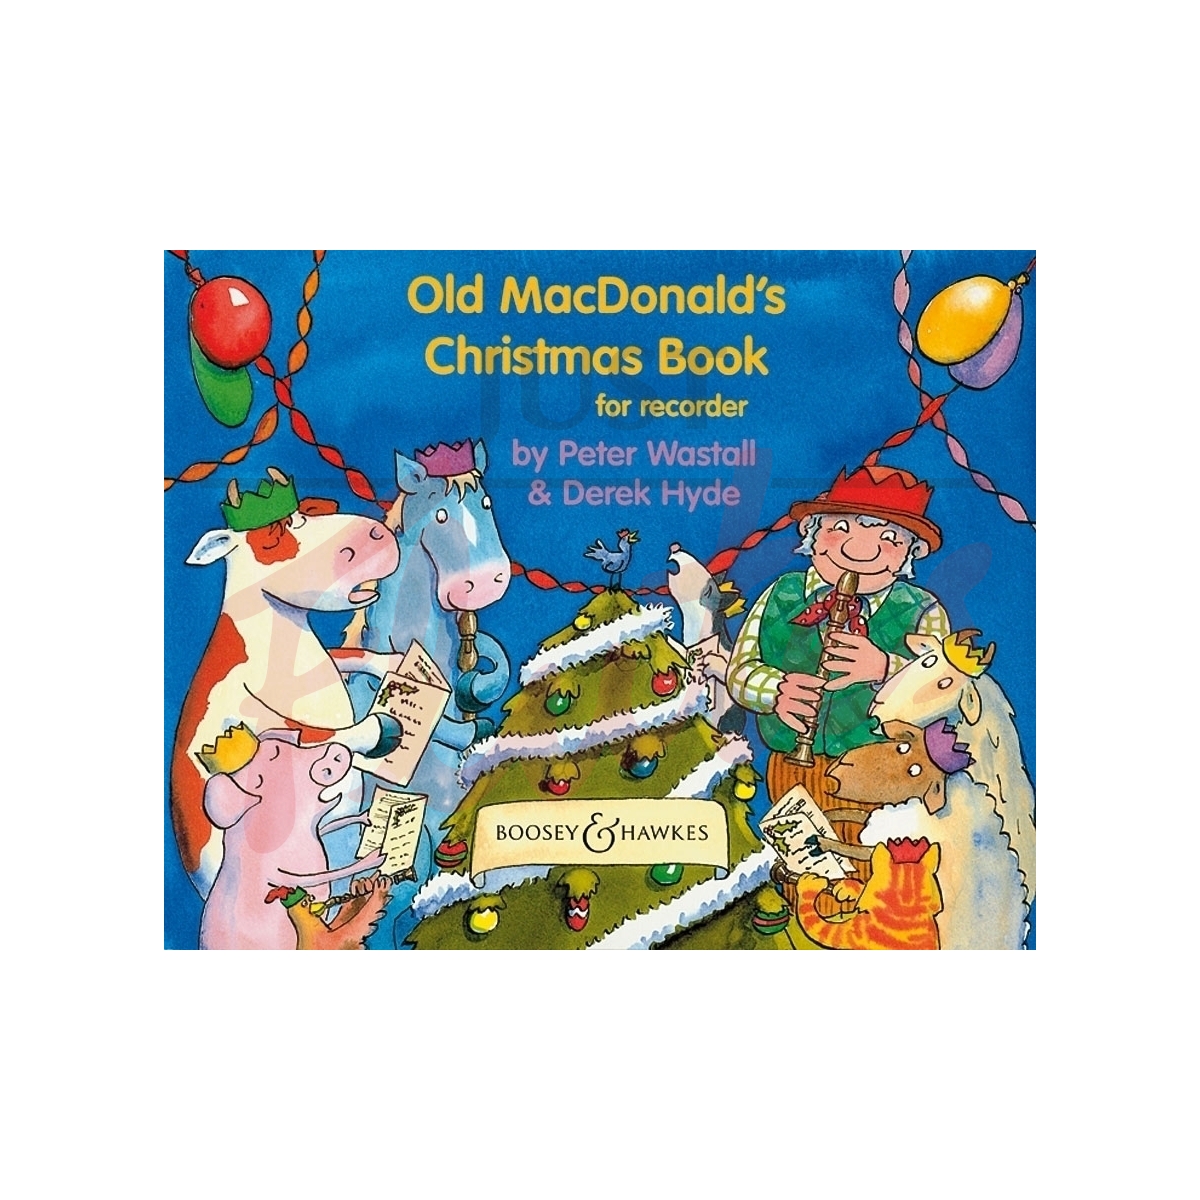 Old MacDonald's Christmas Book for Recorder